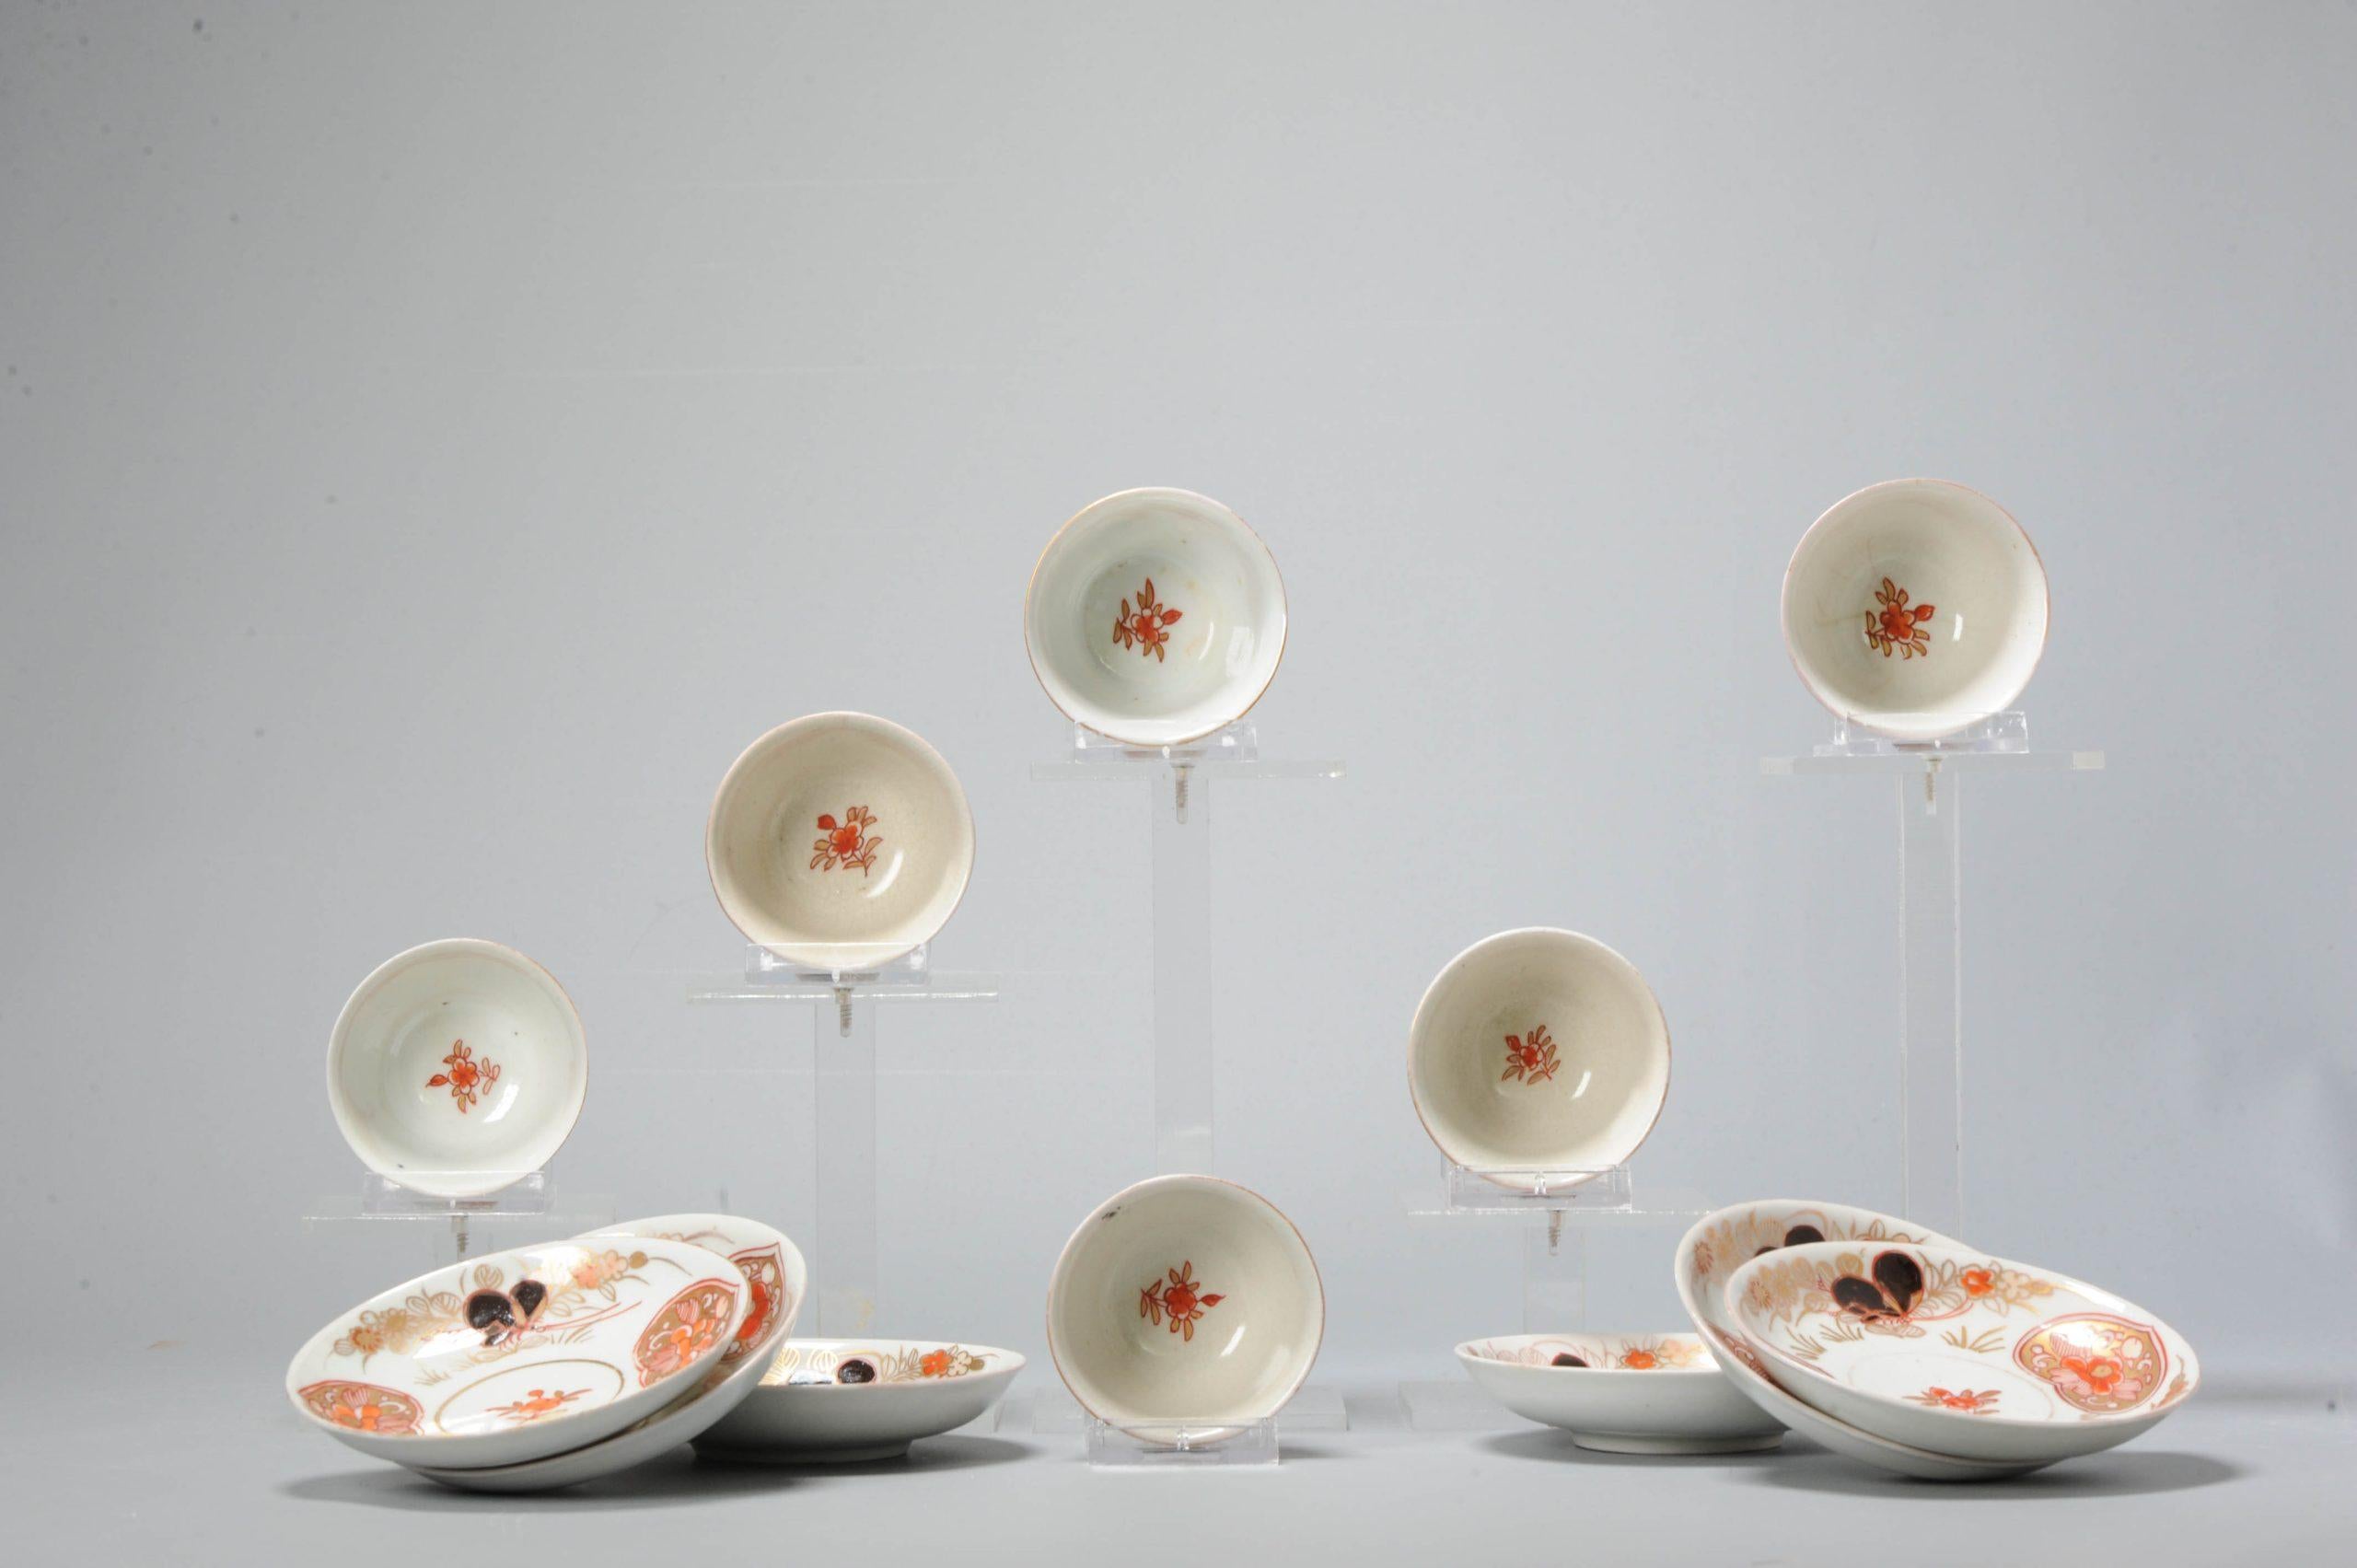 Nice Edo period tea set with imari floral and butterfly decoration.

Additional information:
Material: Porcelain & Pottery
Region of Origin: Japan
Period: 18th century
Age: Pre-1800
Condition: 4 bowls crackled all over, 1 bowl with glaze line